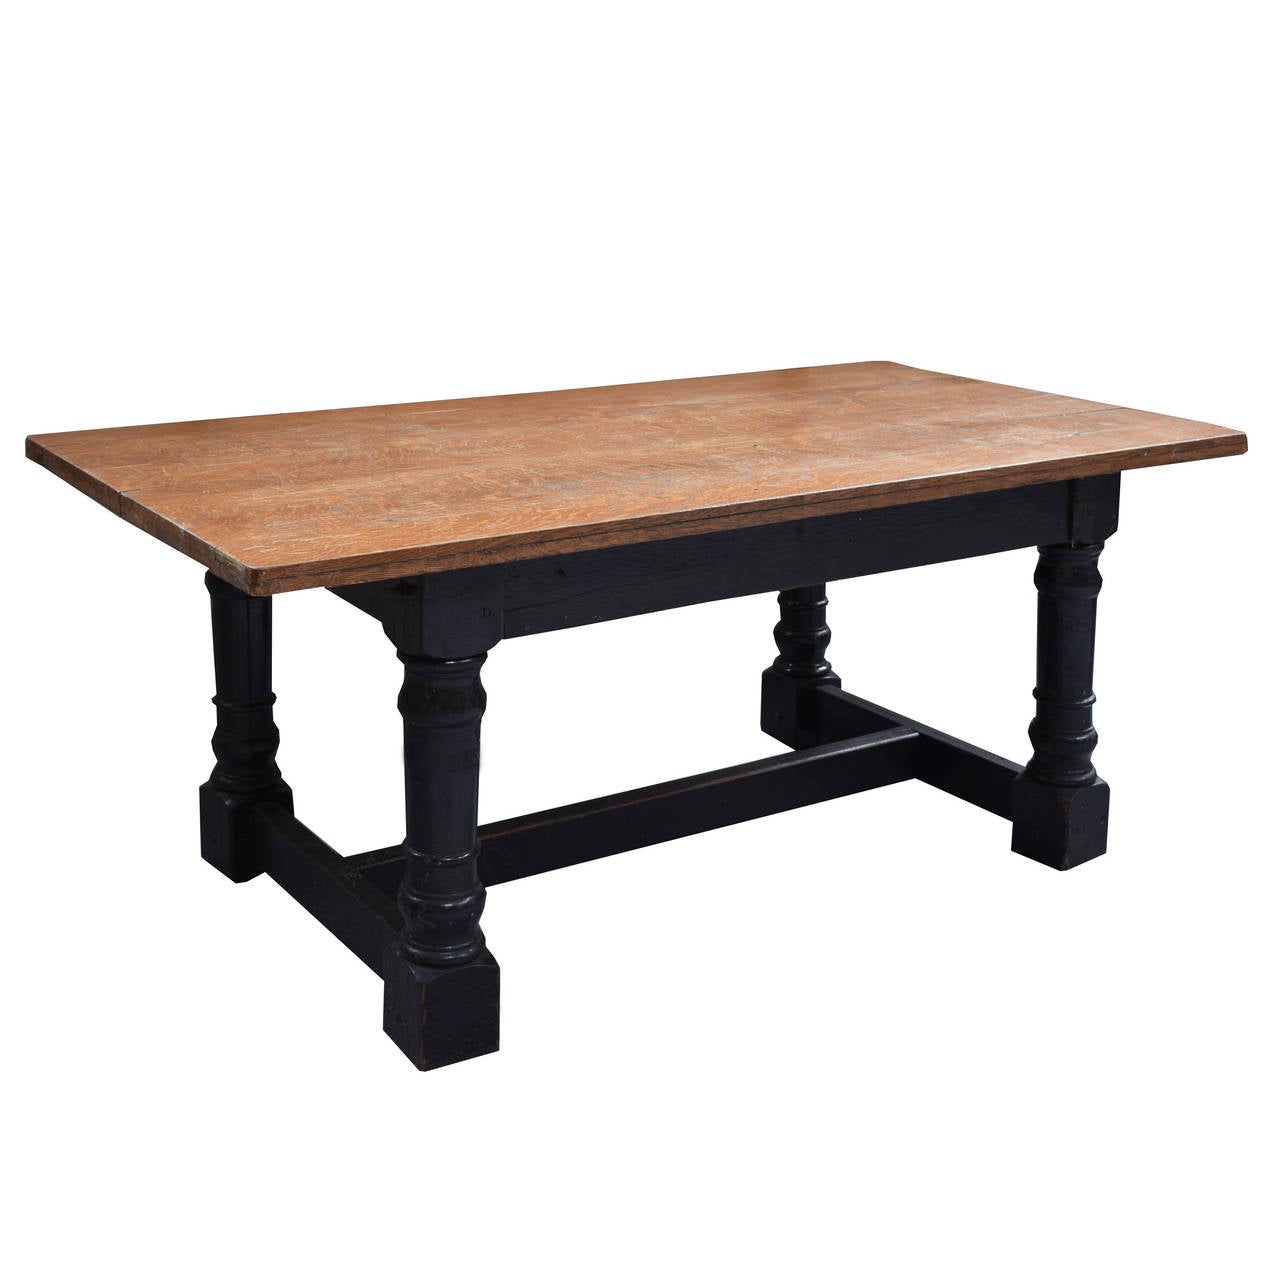 1920s quarter sawn oak table with black painted trestle base. From the dining hall of historic Fourth Presbyterian Church on Michigan Avenue in Chicago. Originally purchased from Marshall Fields by the church.